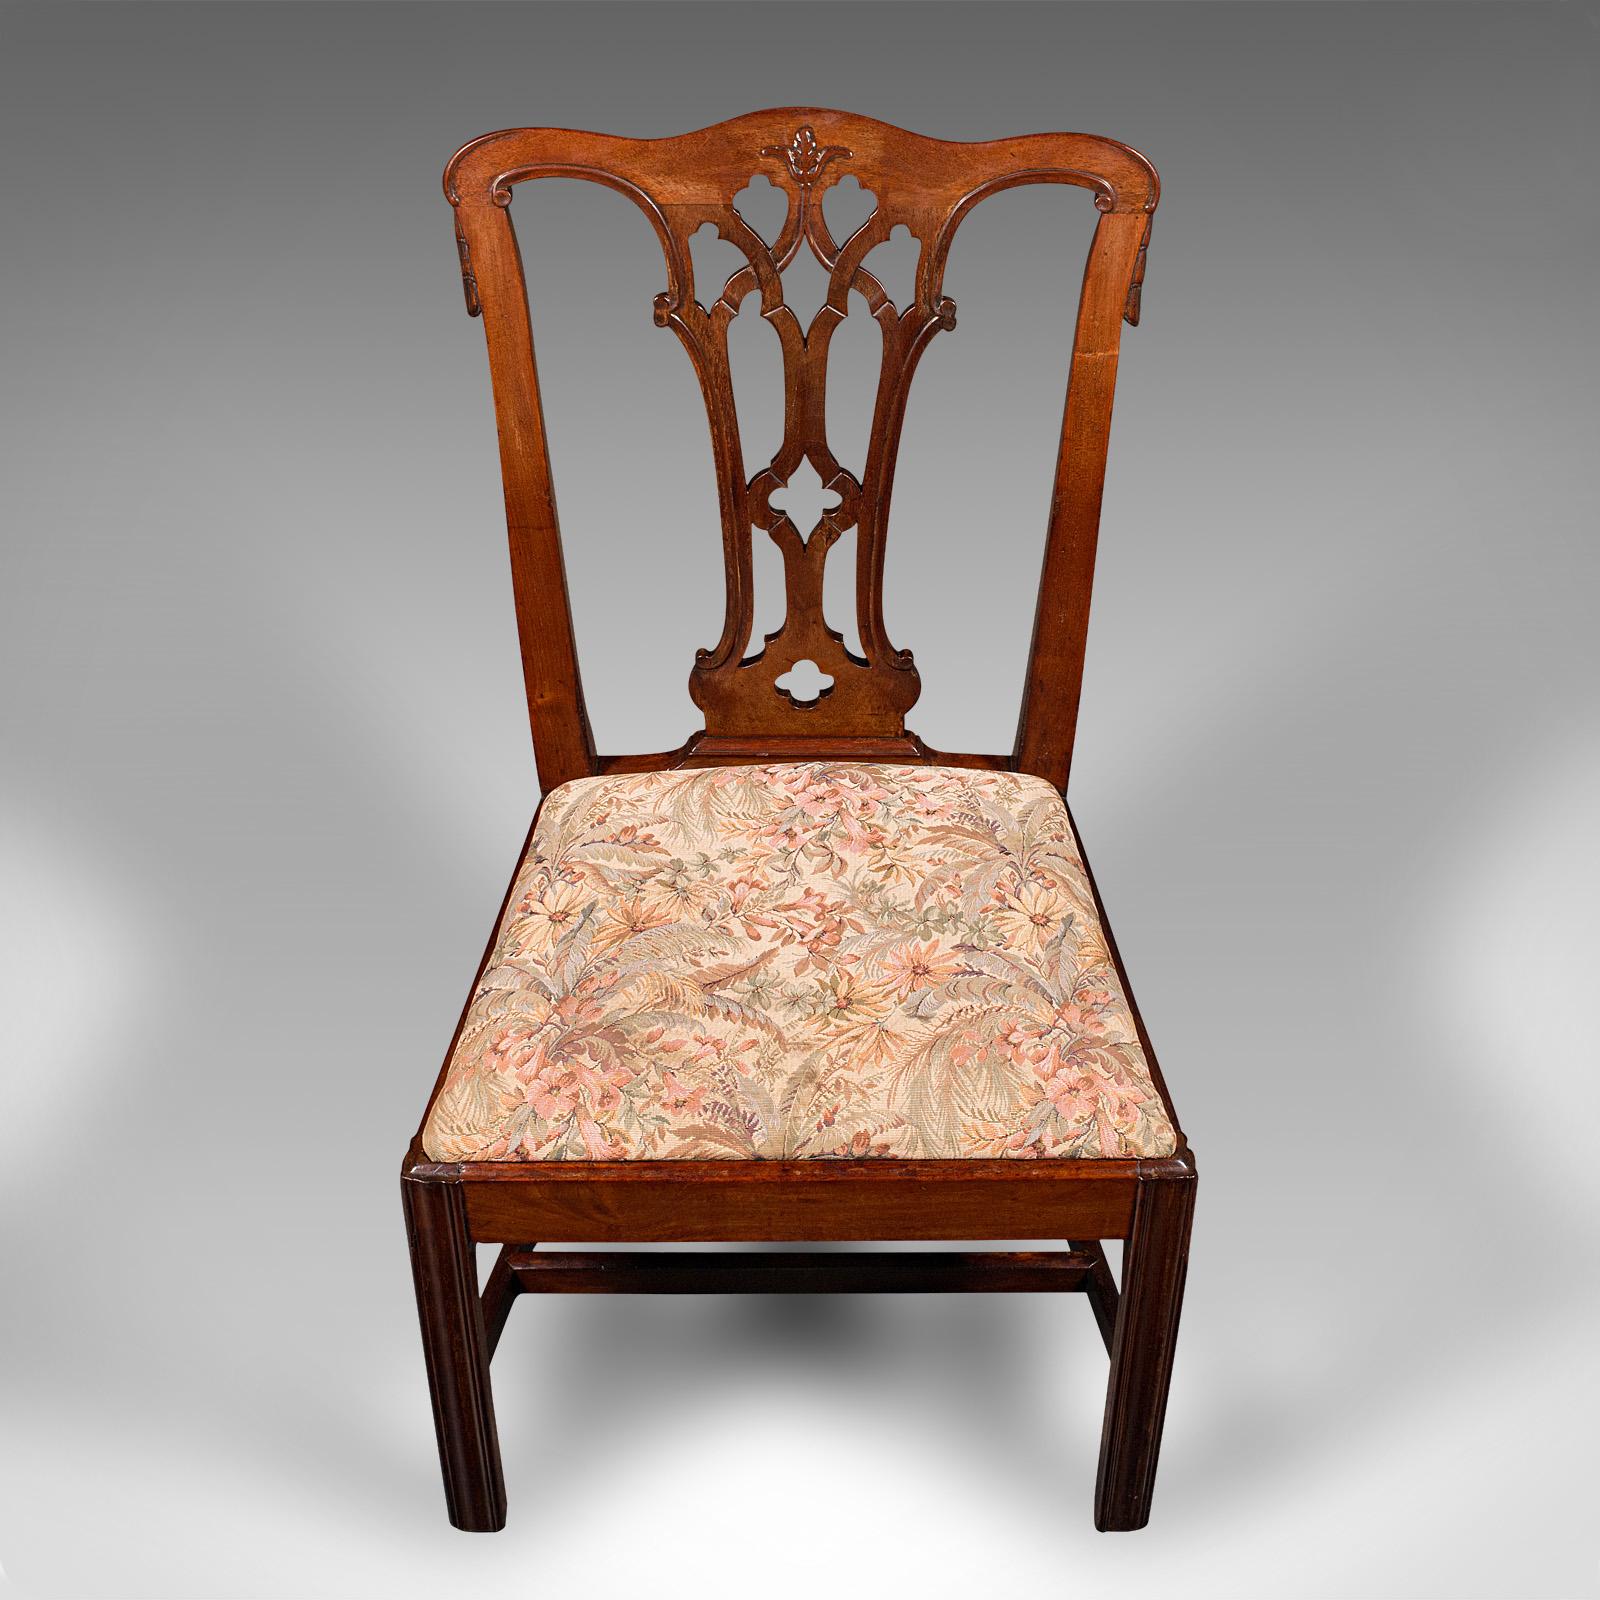 Textile 6 Antique Dining Room Chairs, English, Walnut, After Chippendale, Georgian, 1800